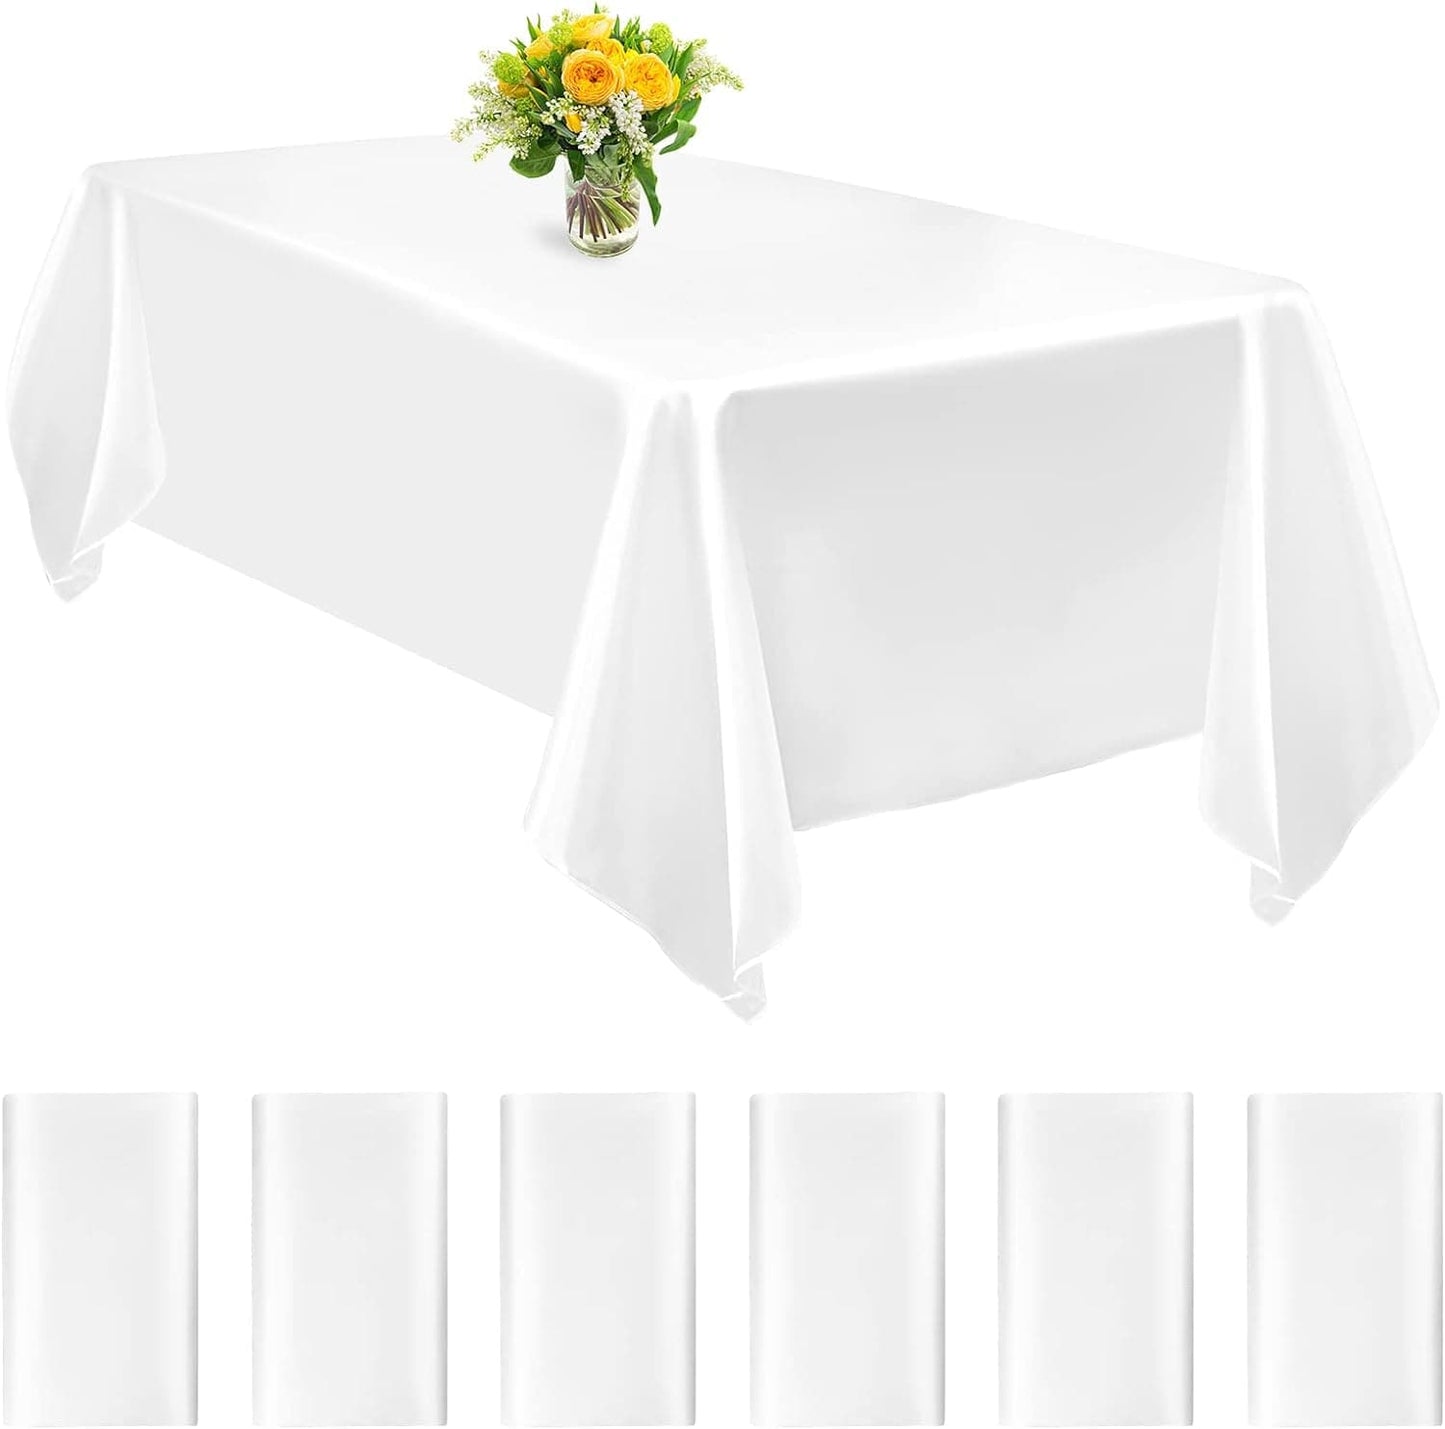 Satin Rectangle Tablecloth 57 x 108 Inch Sliver